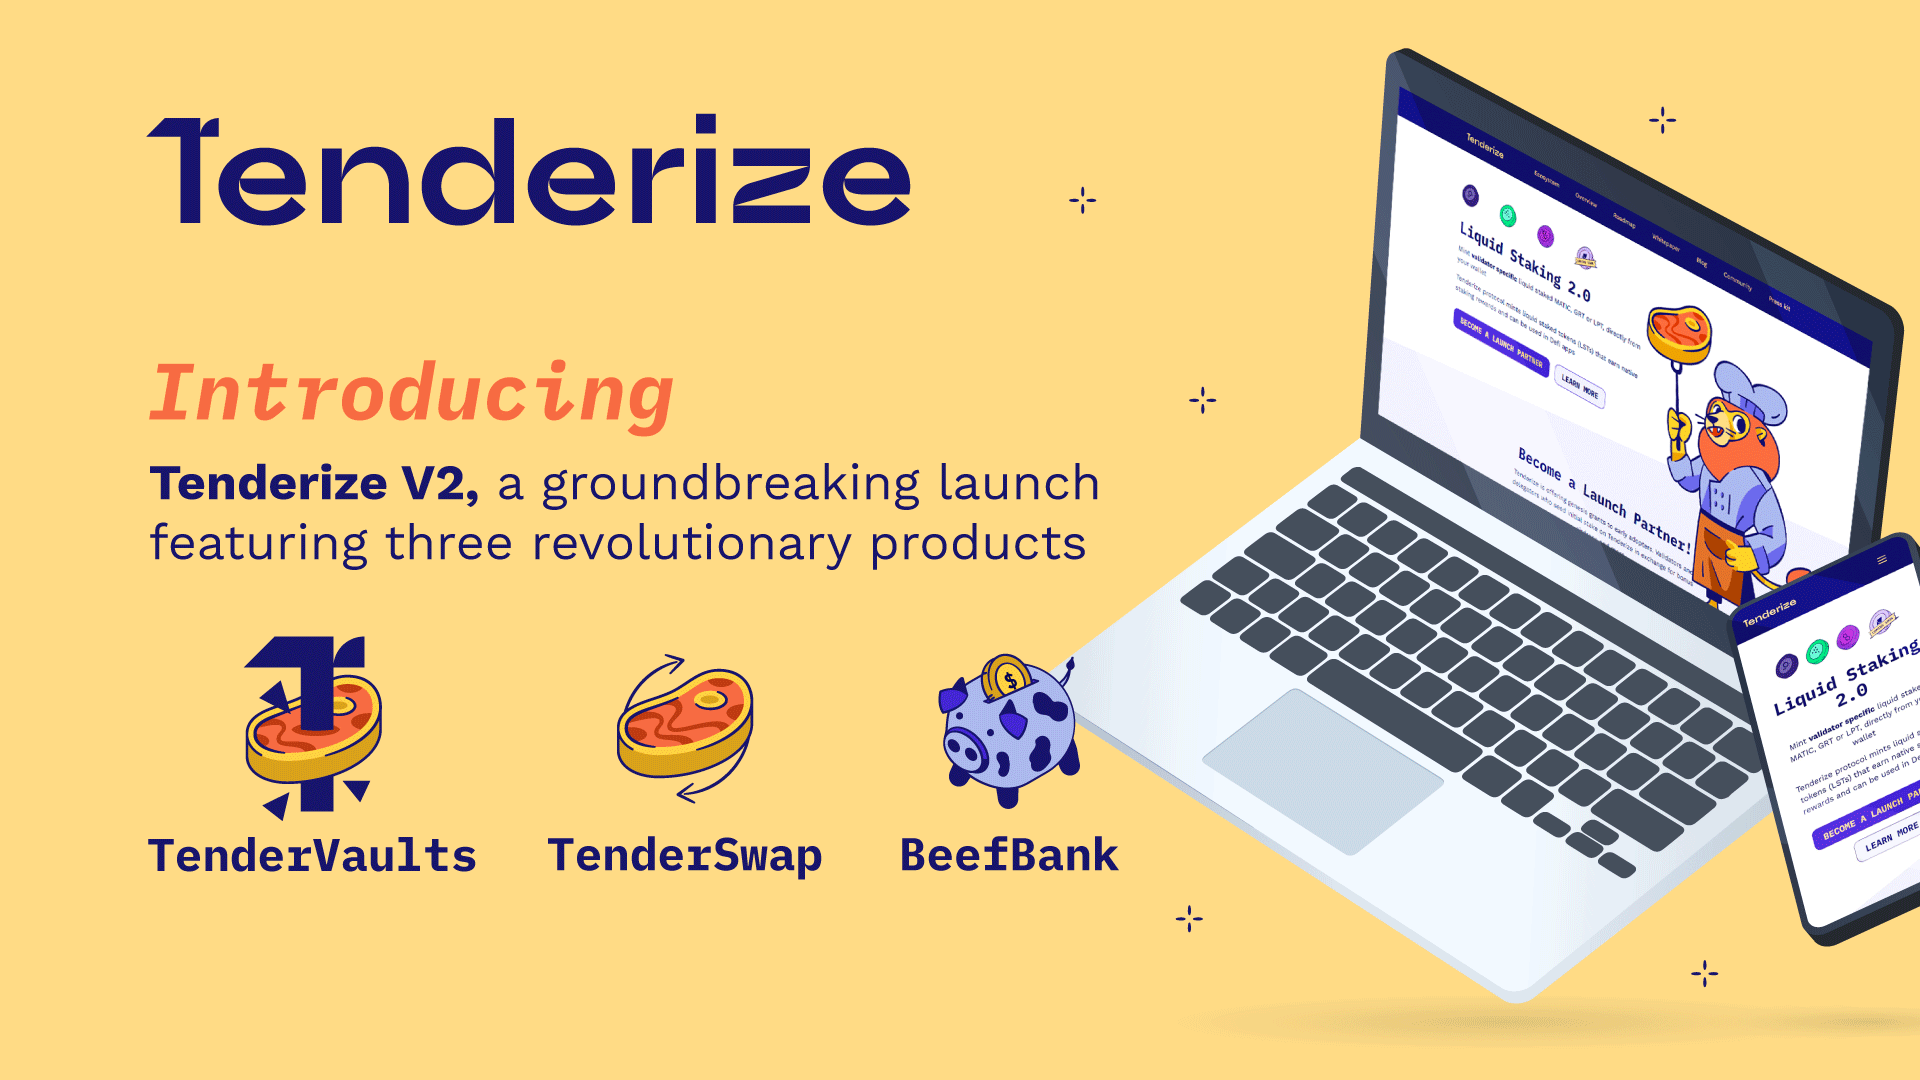 Introducing Tenderize V2 & our new look!